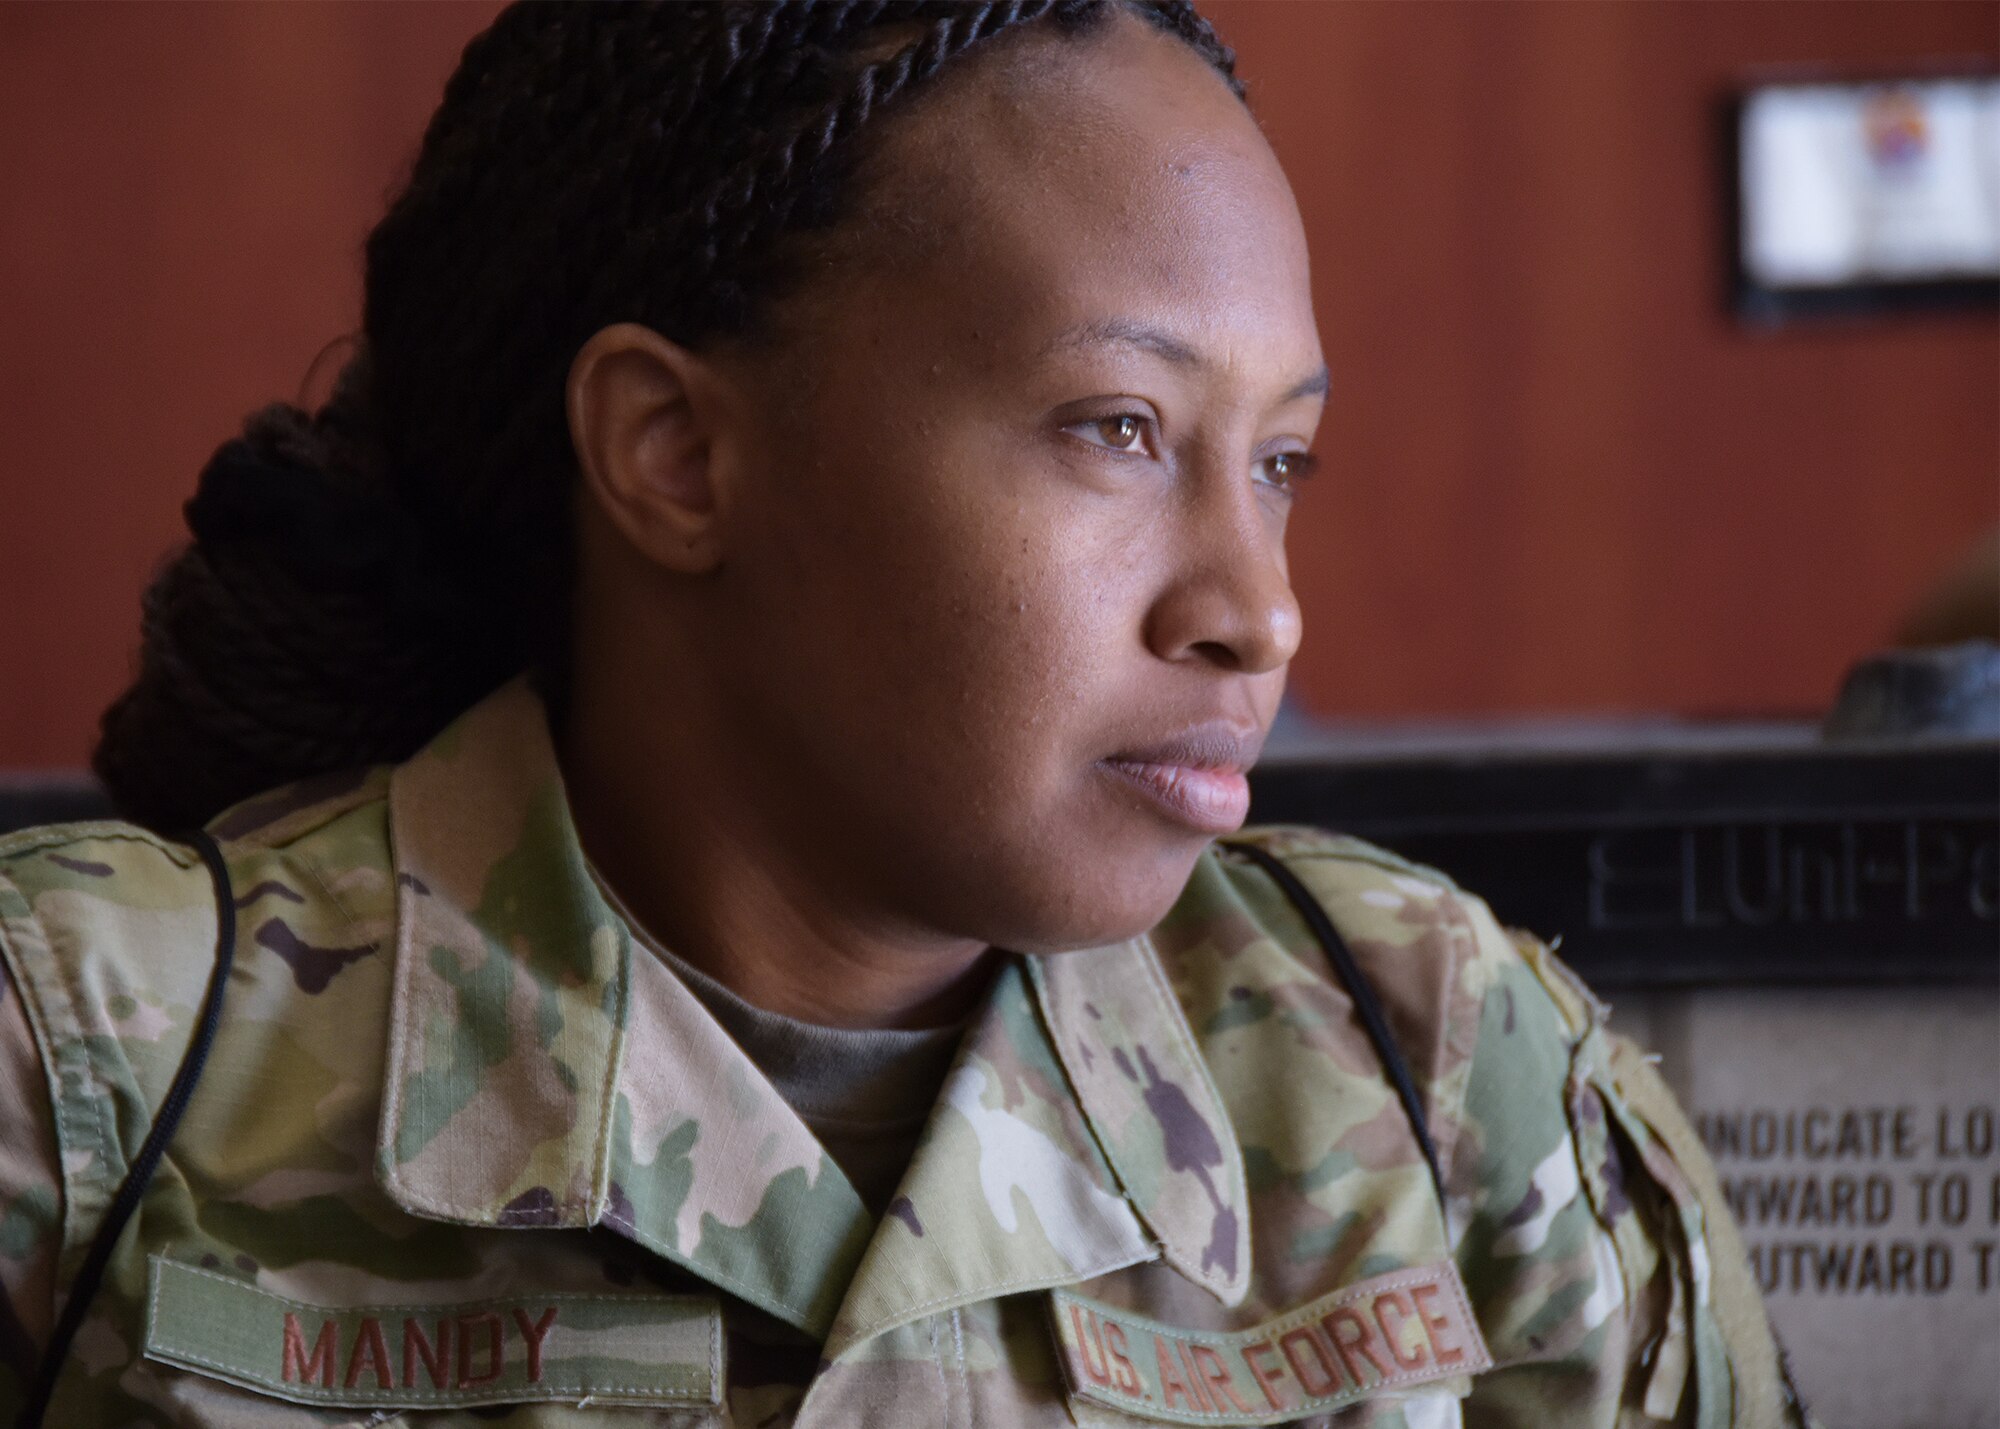 1st Lt. Paris Mandy, 944th Medical Squadron nurse, volunteered to the presidential call for health care professionals from the U.S. Reserves to support the COVID-19 efforts in New York City.